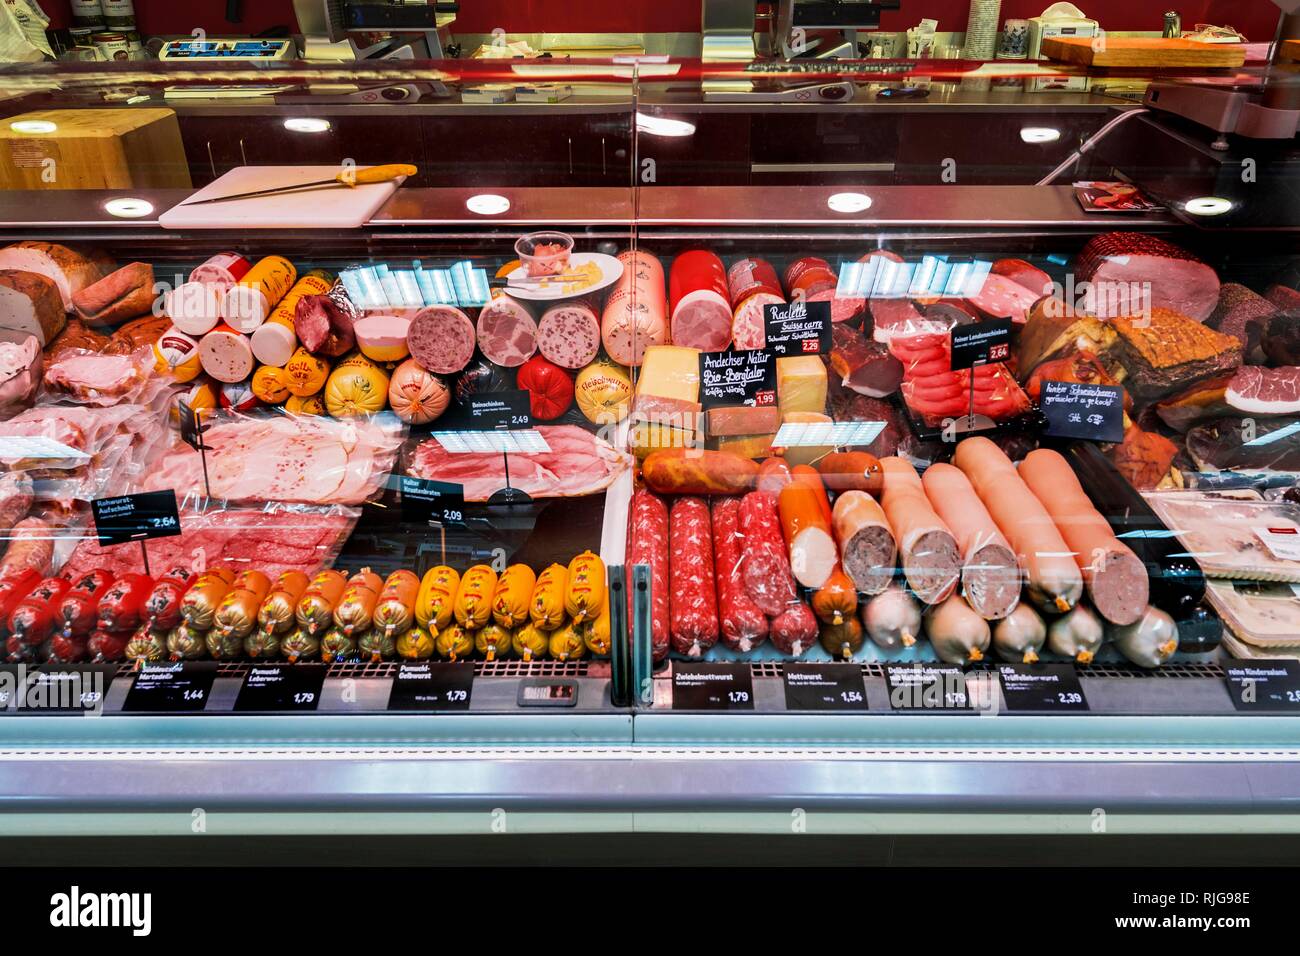 Sausage counter with sausage products in the supermarket, Munich, Upper Bavaria, Bavaria, Germany Stock Photo